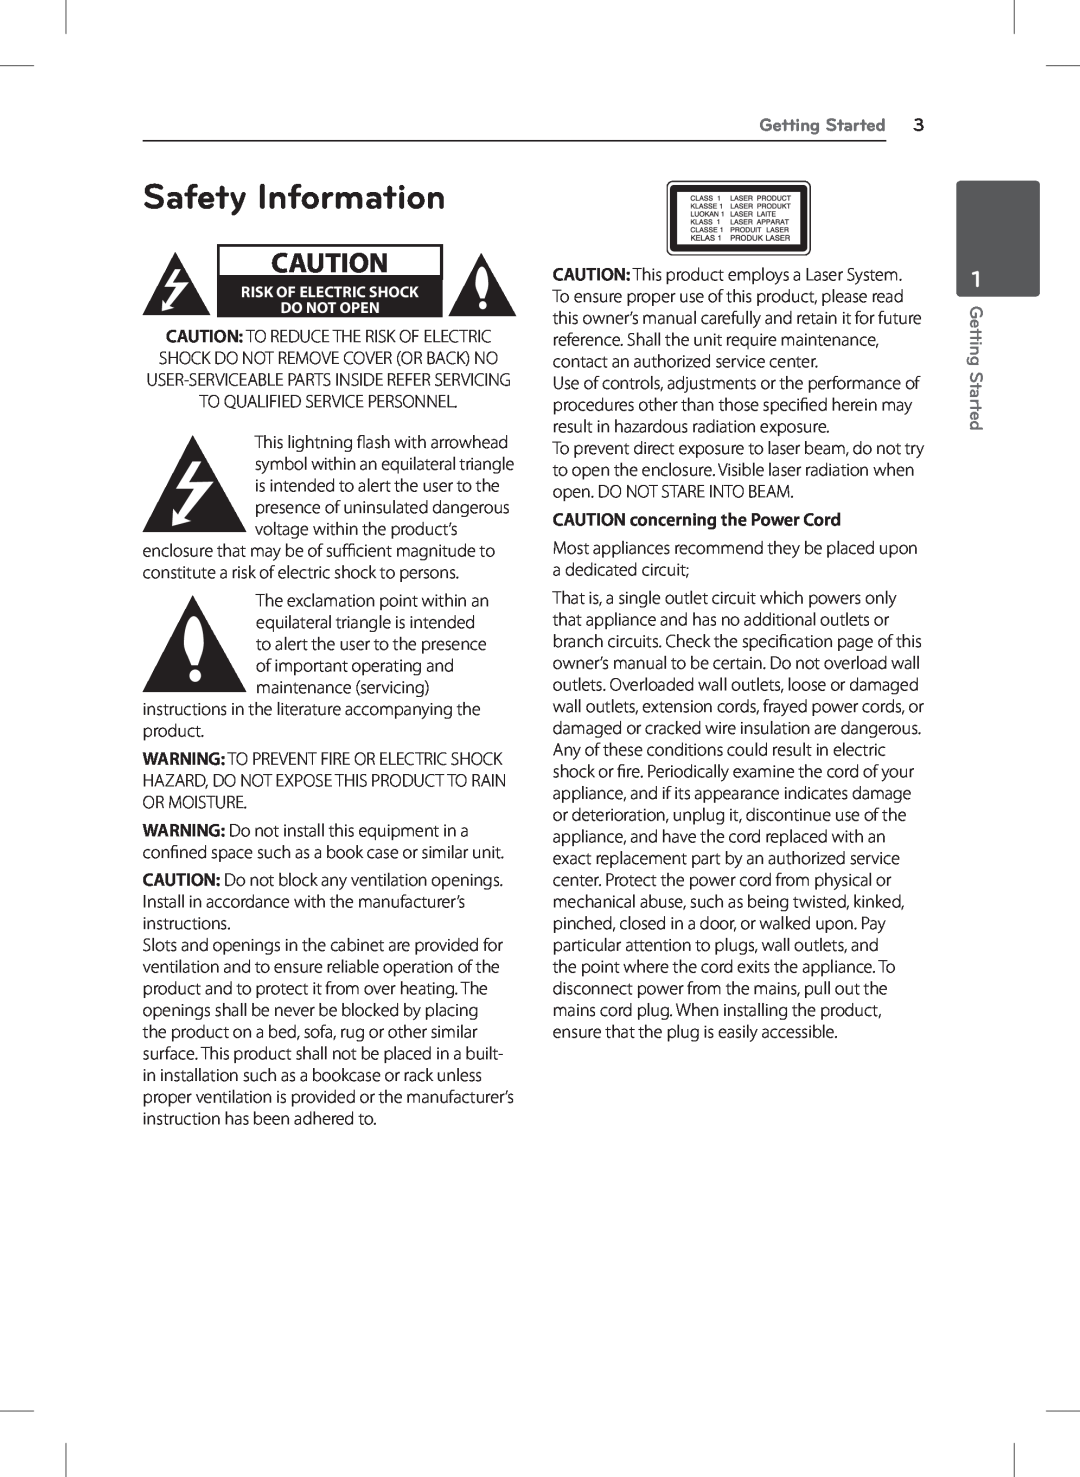 LG Electronics DVX692H owner manual Safety Information, CAUTION concerning the Power Cord, Getting Started 